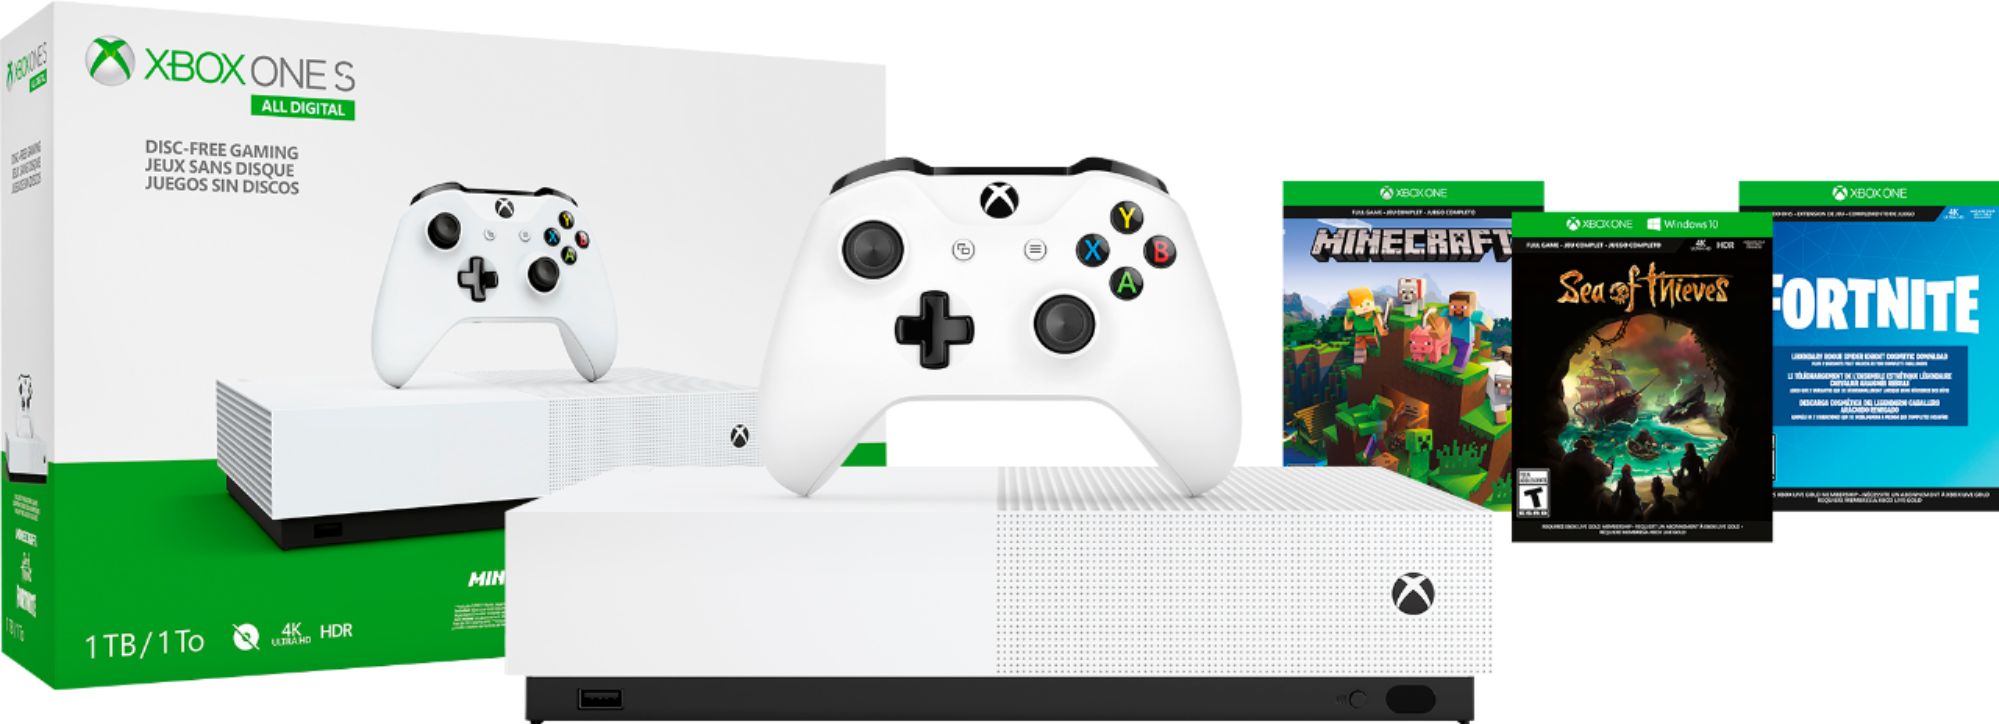 Xbox One S Where To Buy It At The Best Price In The States